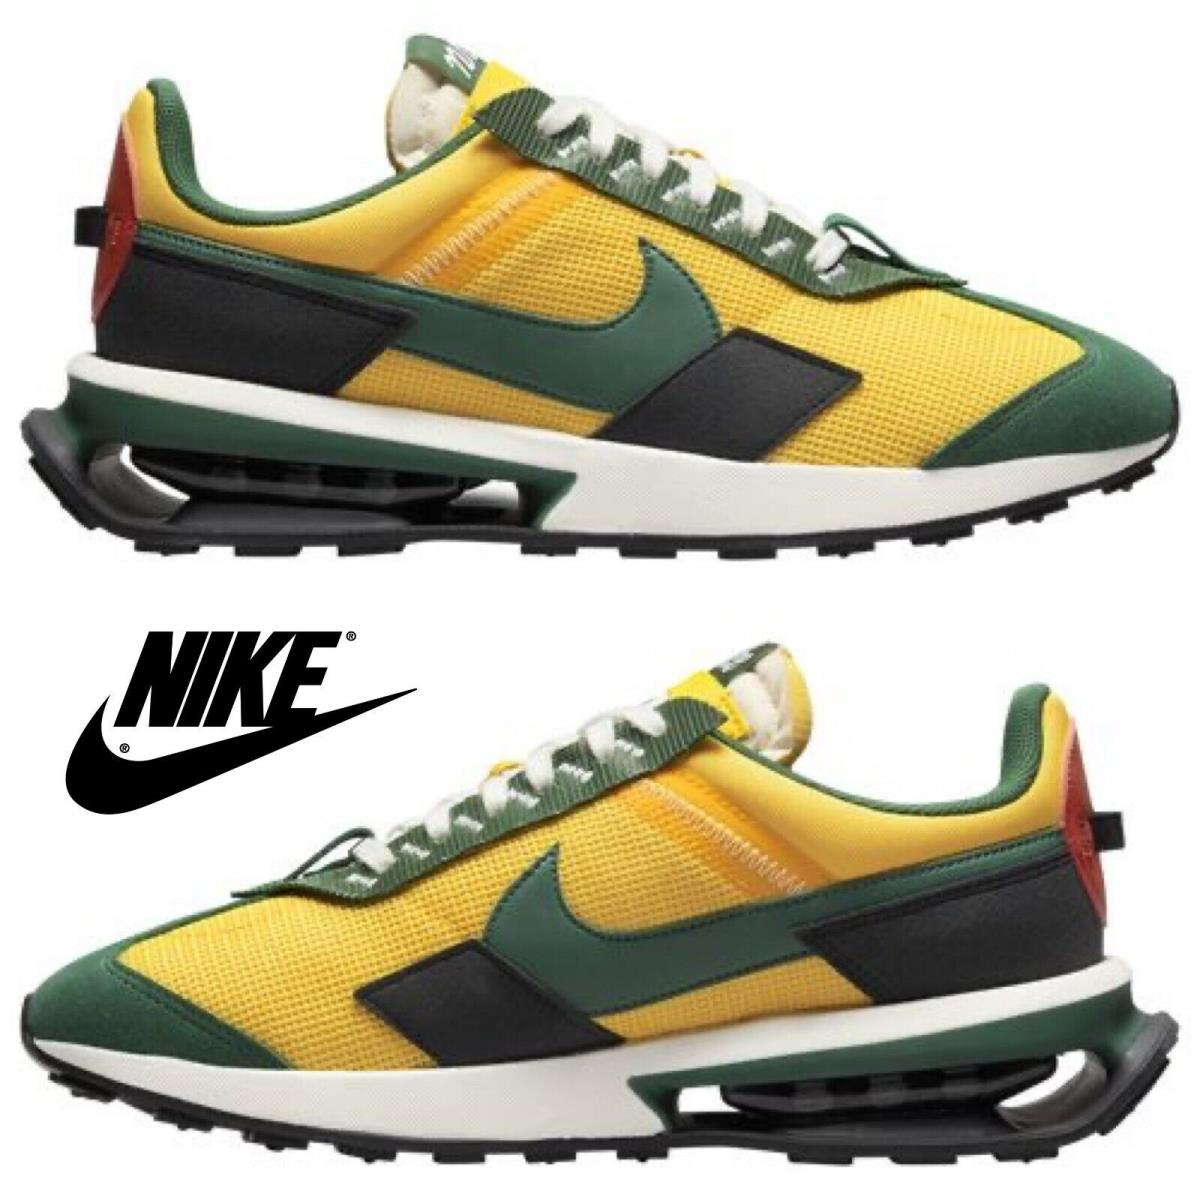 Nike Air Max Pre-day Men`s Sneakers Comfort Casual Sport Shoes Gold Green Black